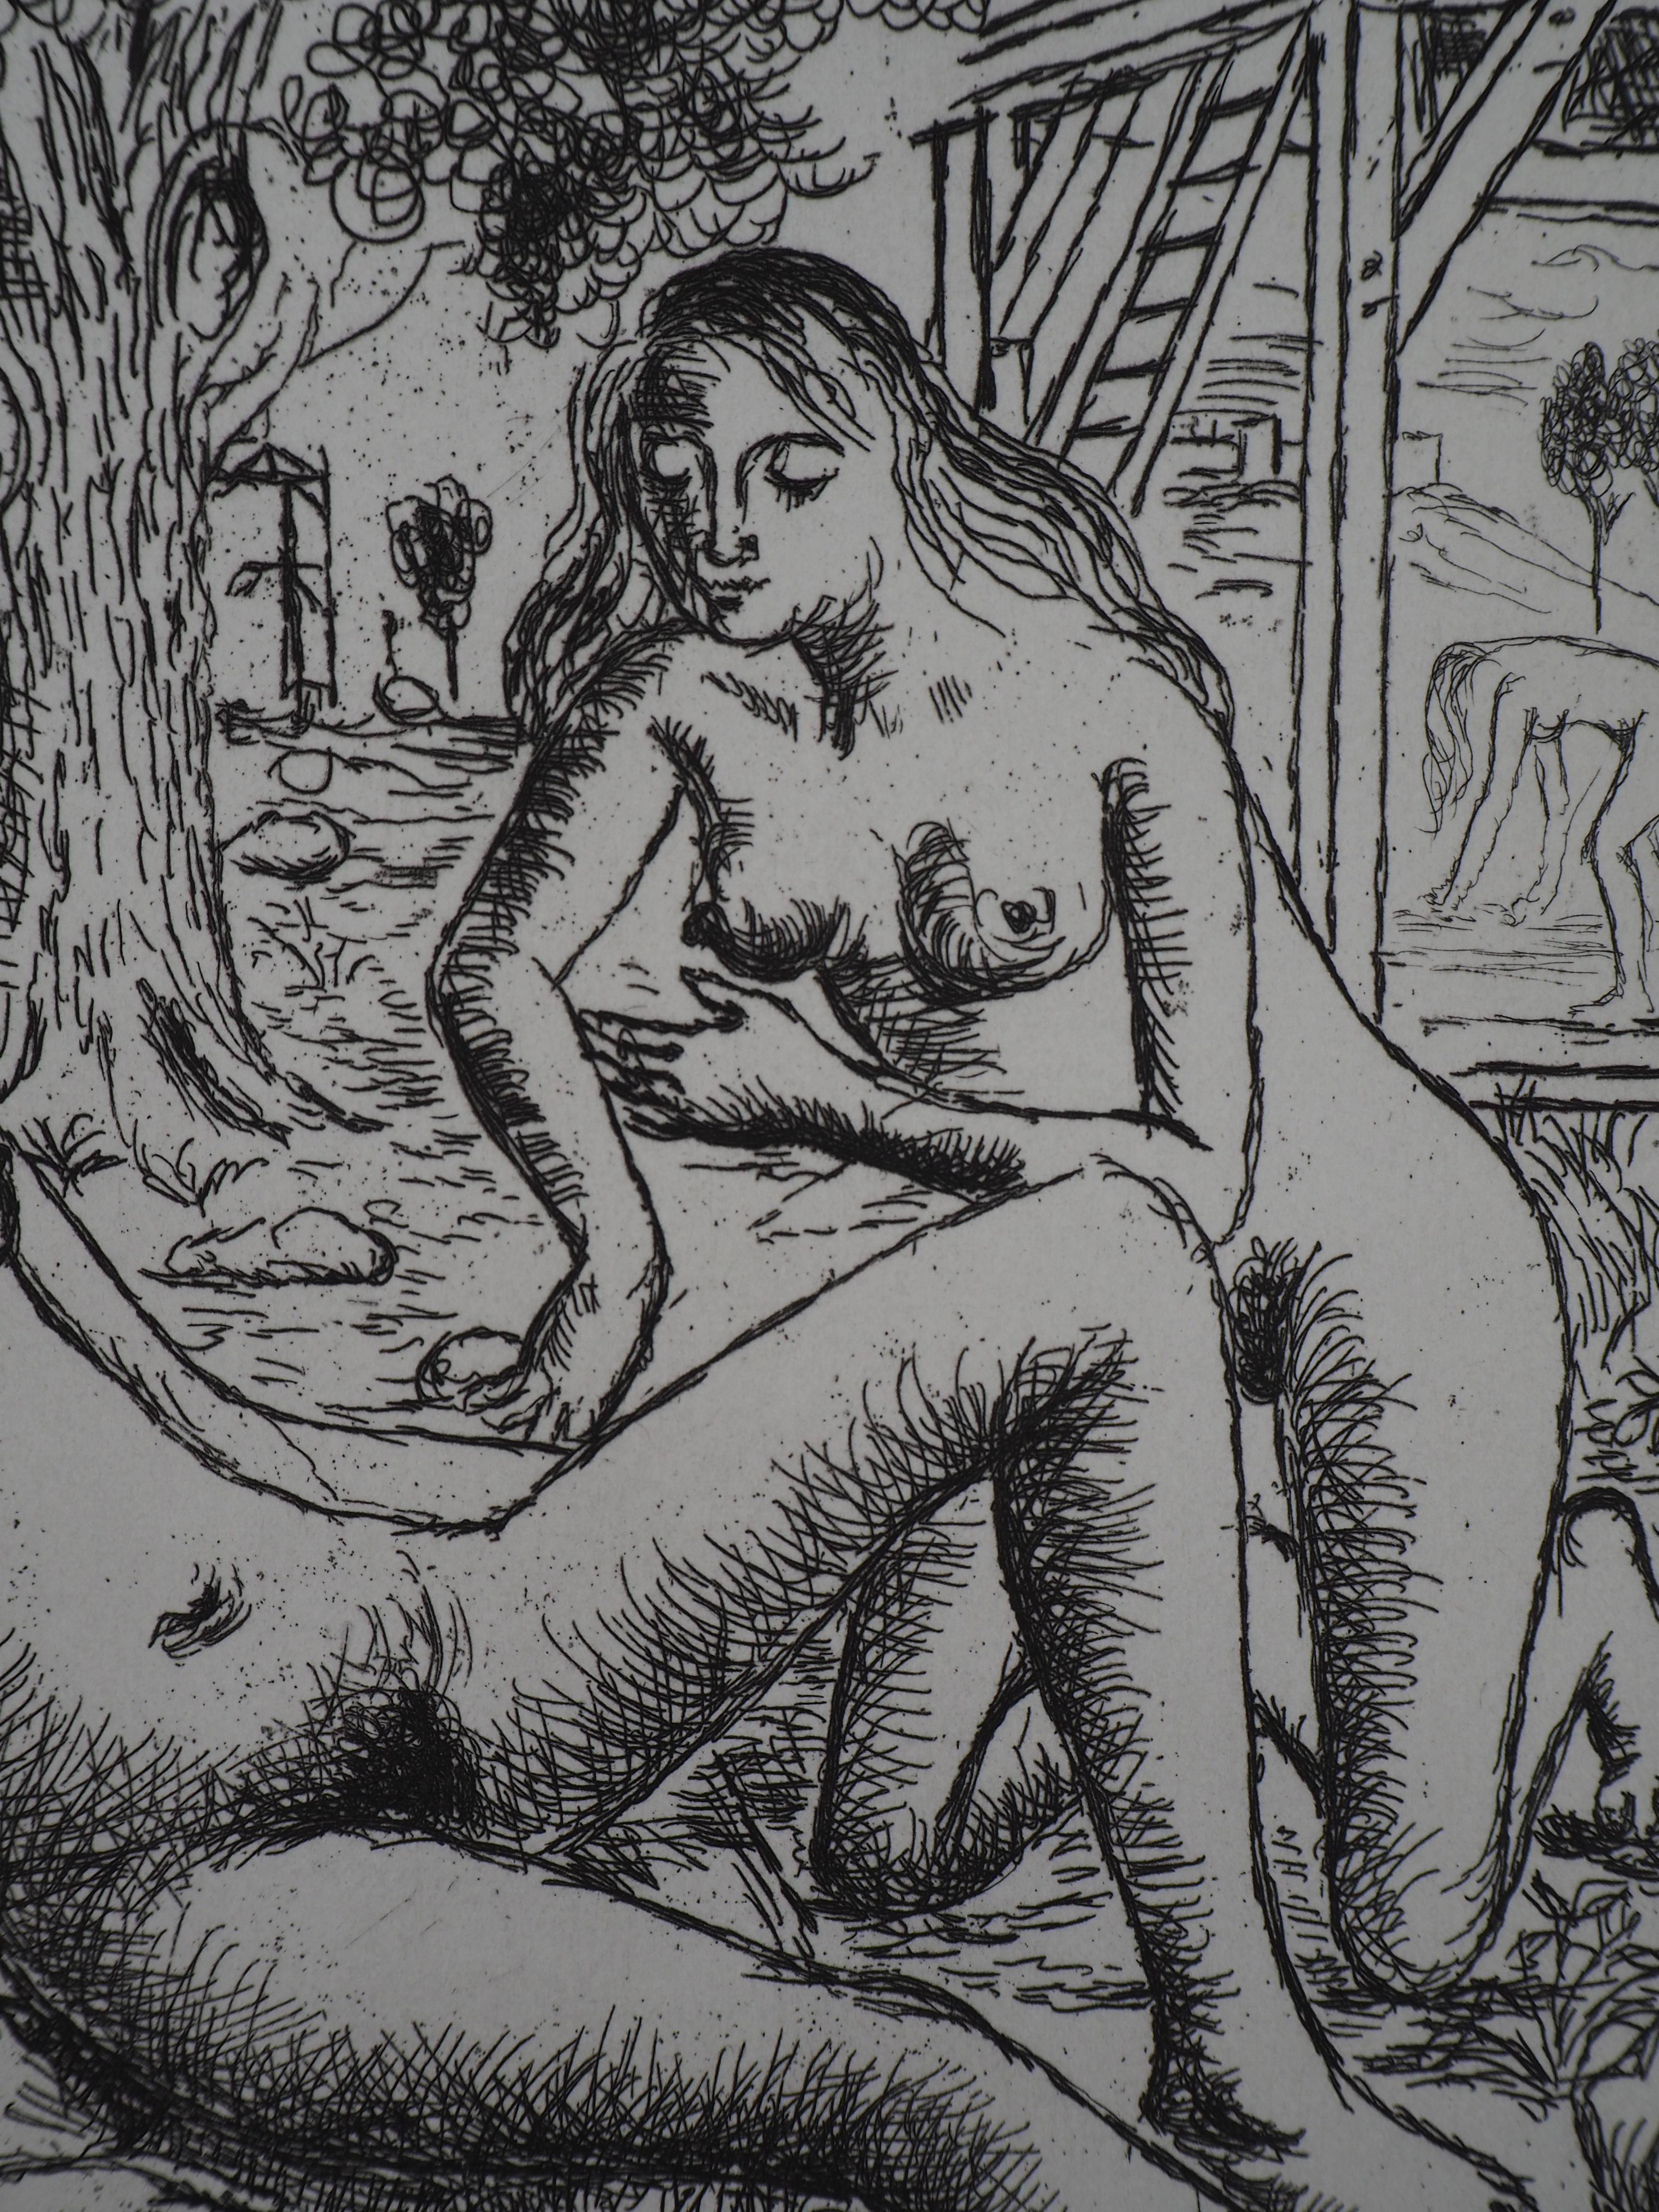 Two Nudes in a Garden - Original signed etching - 1971 - Modern Print by Paul Delvaux